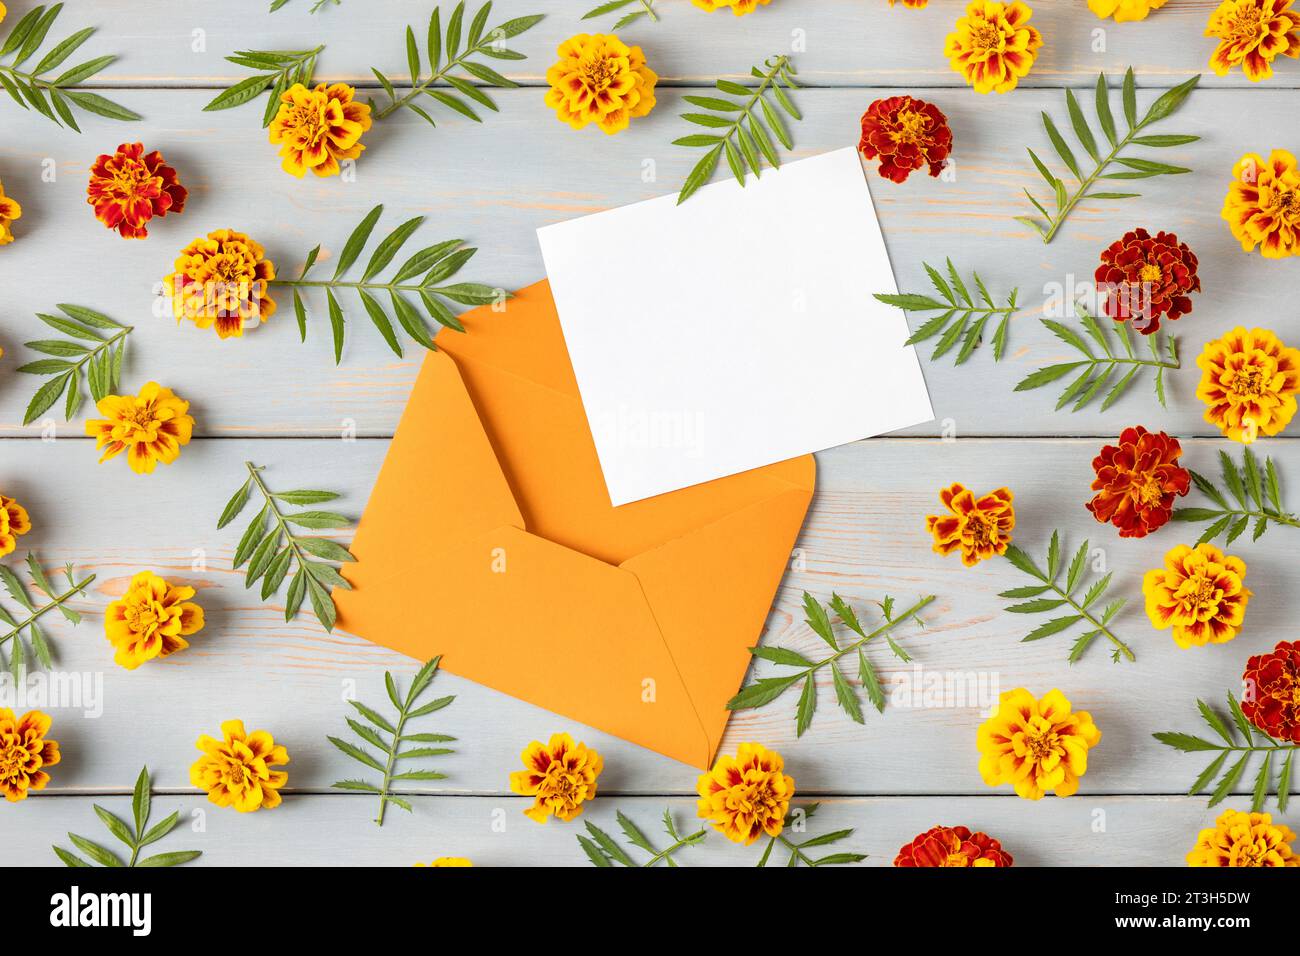 Orange envelope with a white blank sheet of paper for text and orange marigold flowers on a blue wooden table. Festive office desktop concept. Stock Photo